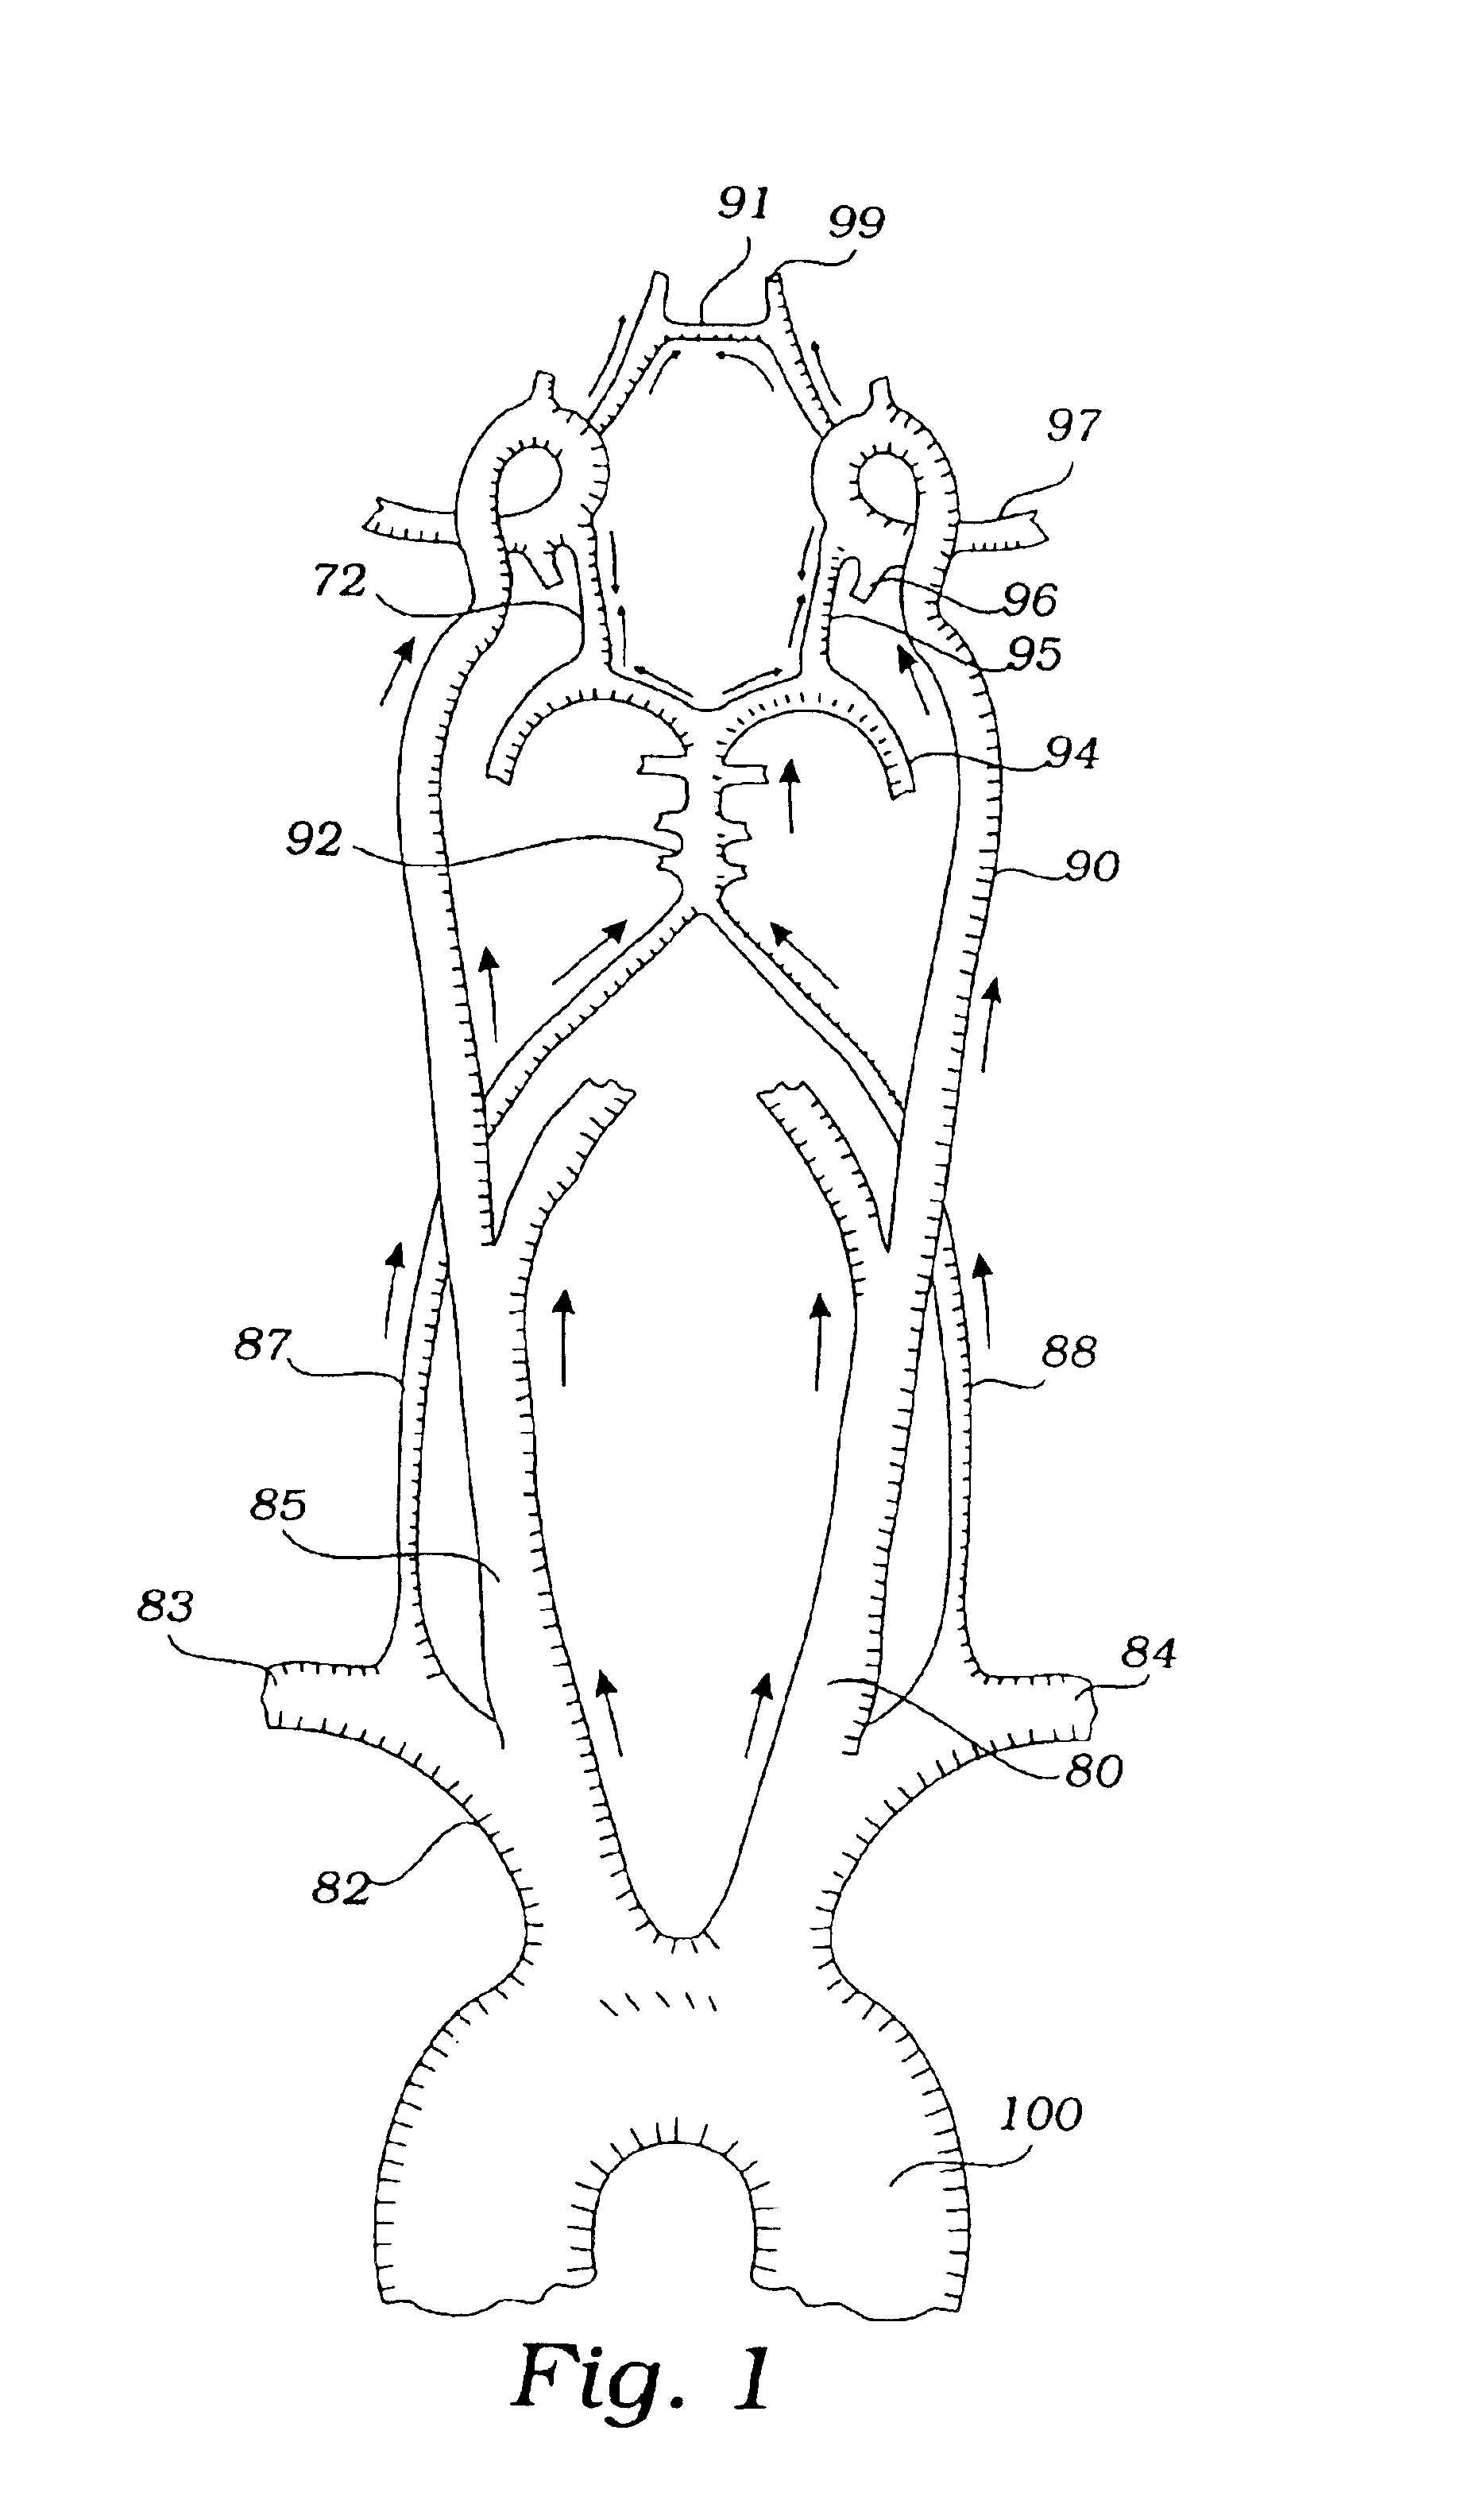 Devices and methods for preventing distal embolization using flow reversal by partial occlusion of the brachiocephalic artery